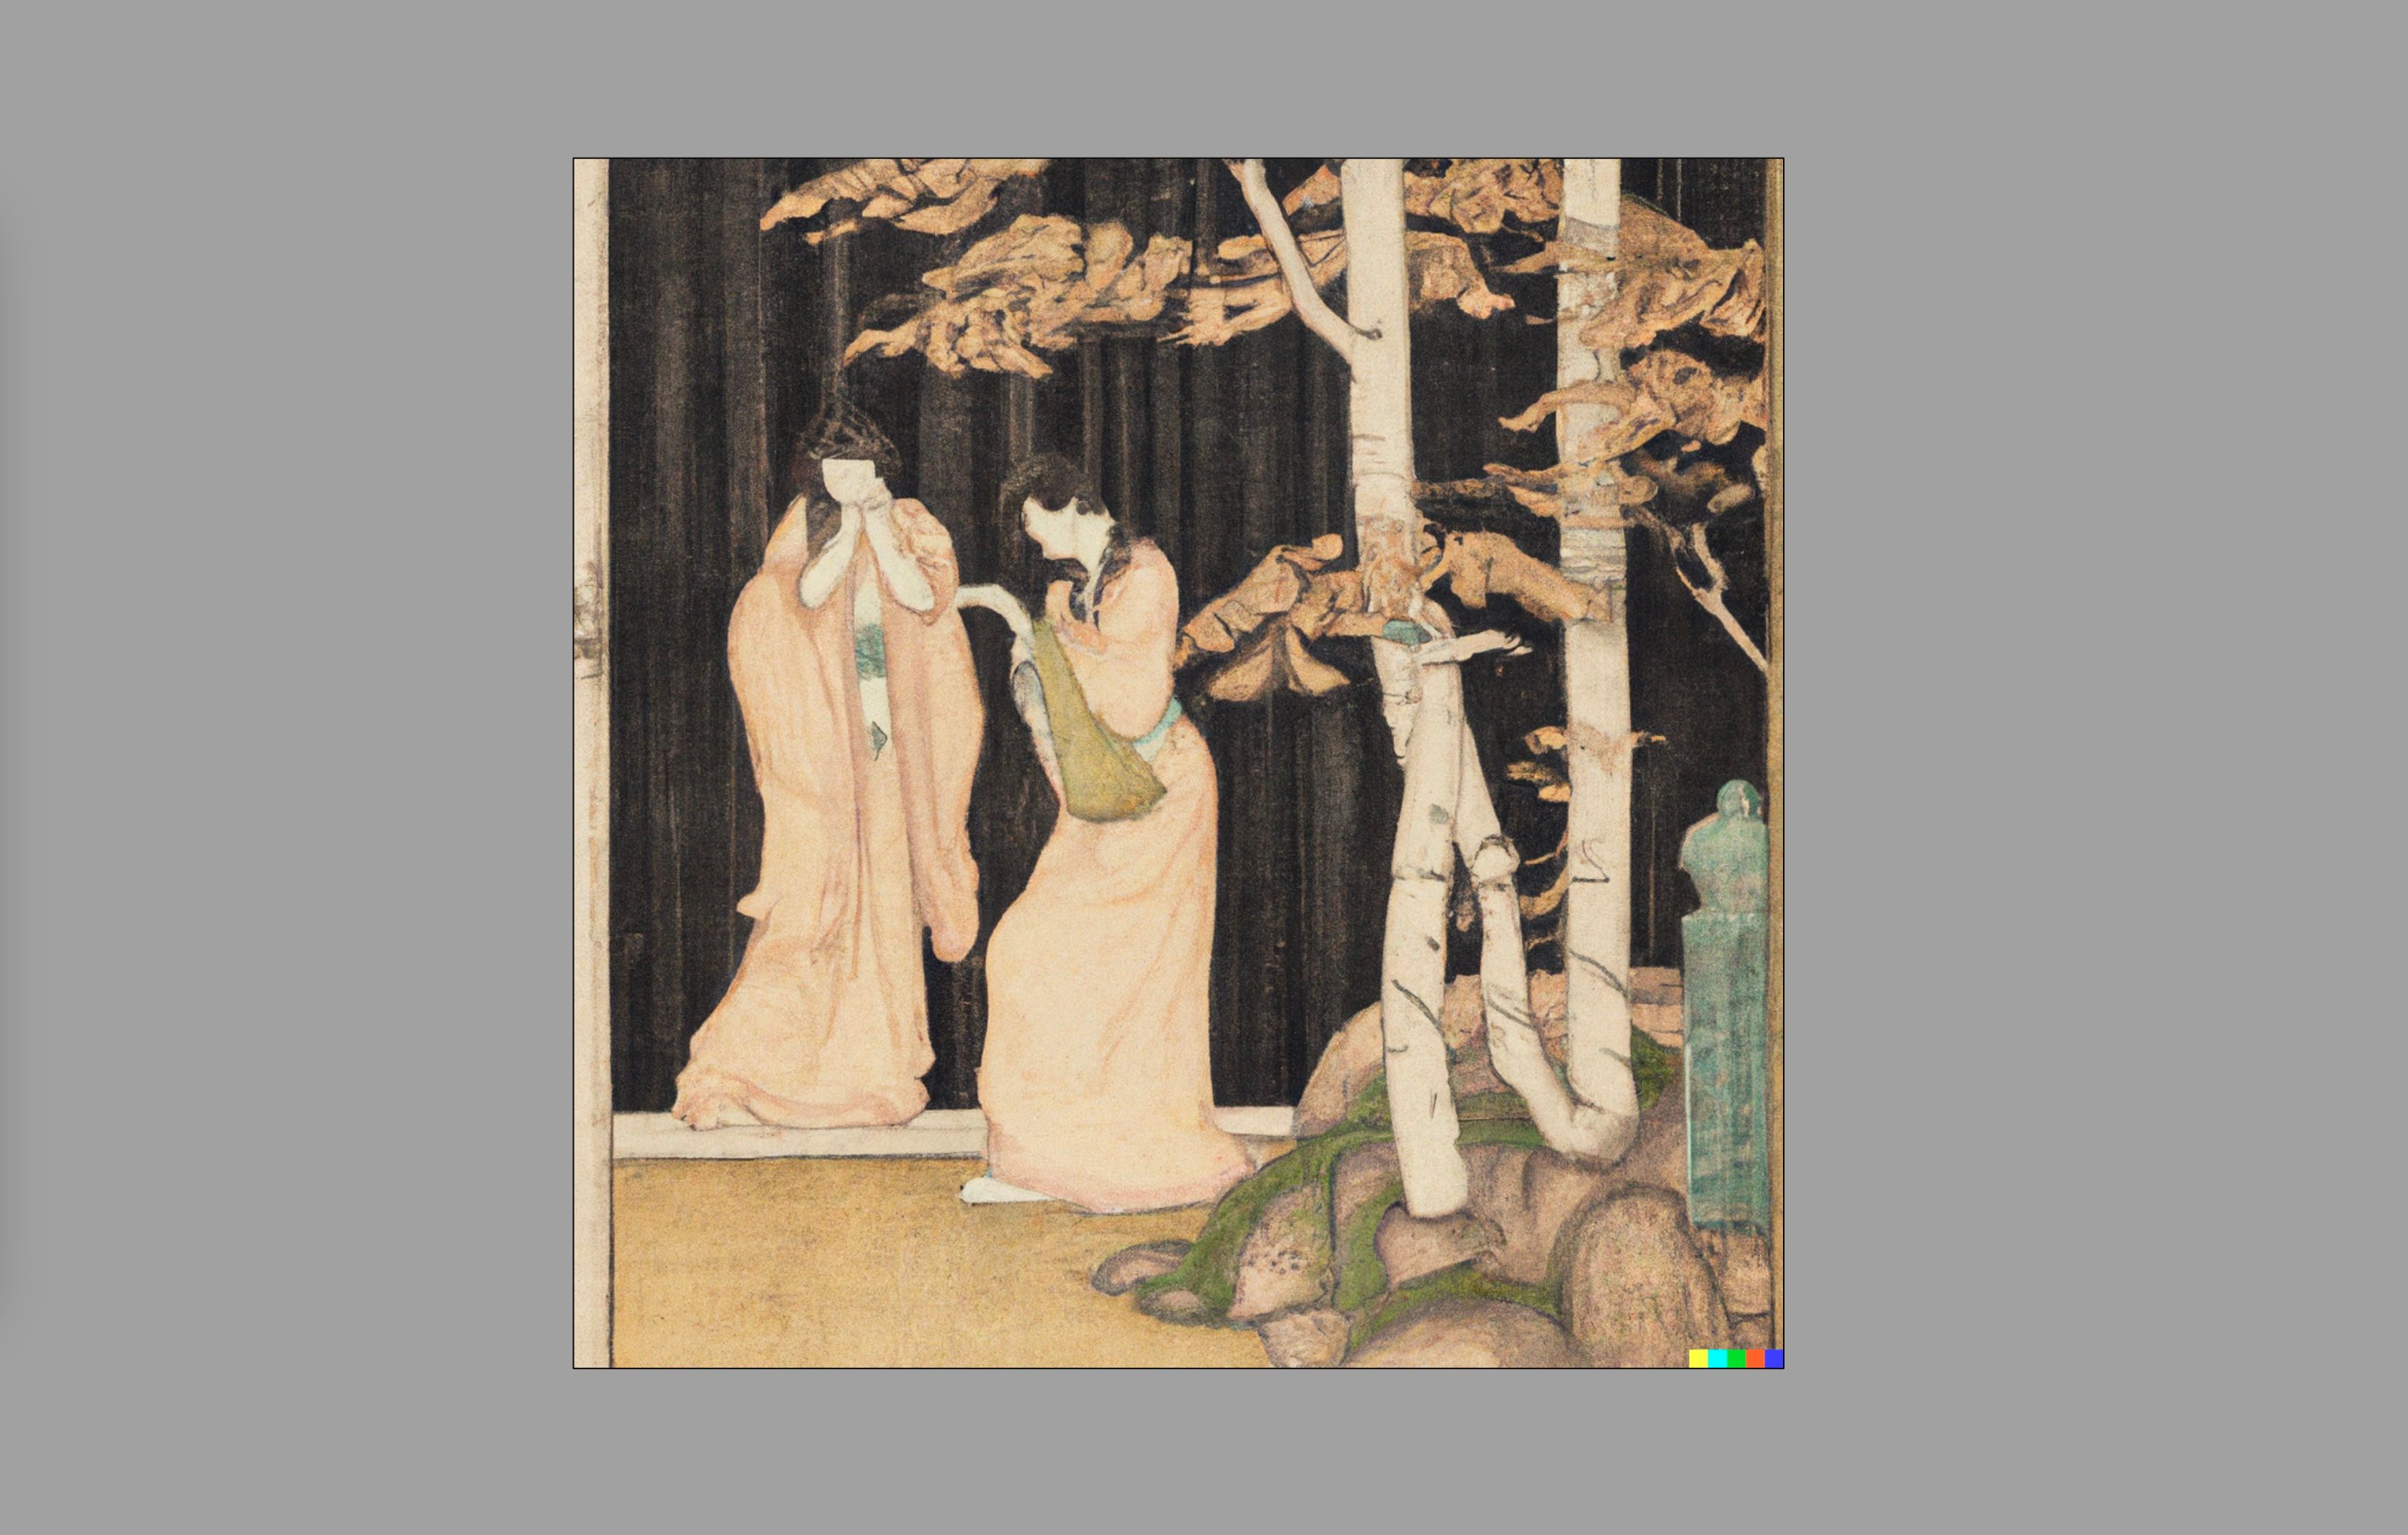 An Ukiyo-e style image of two japanese woman, generated with Dall-E